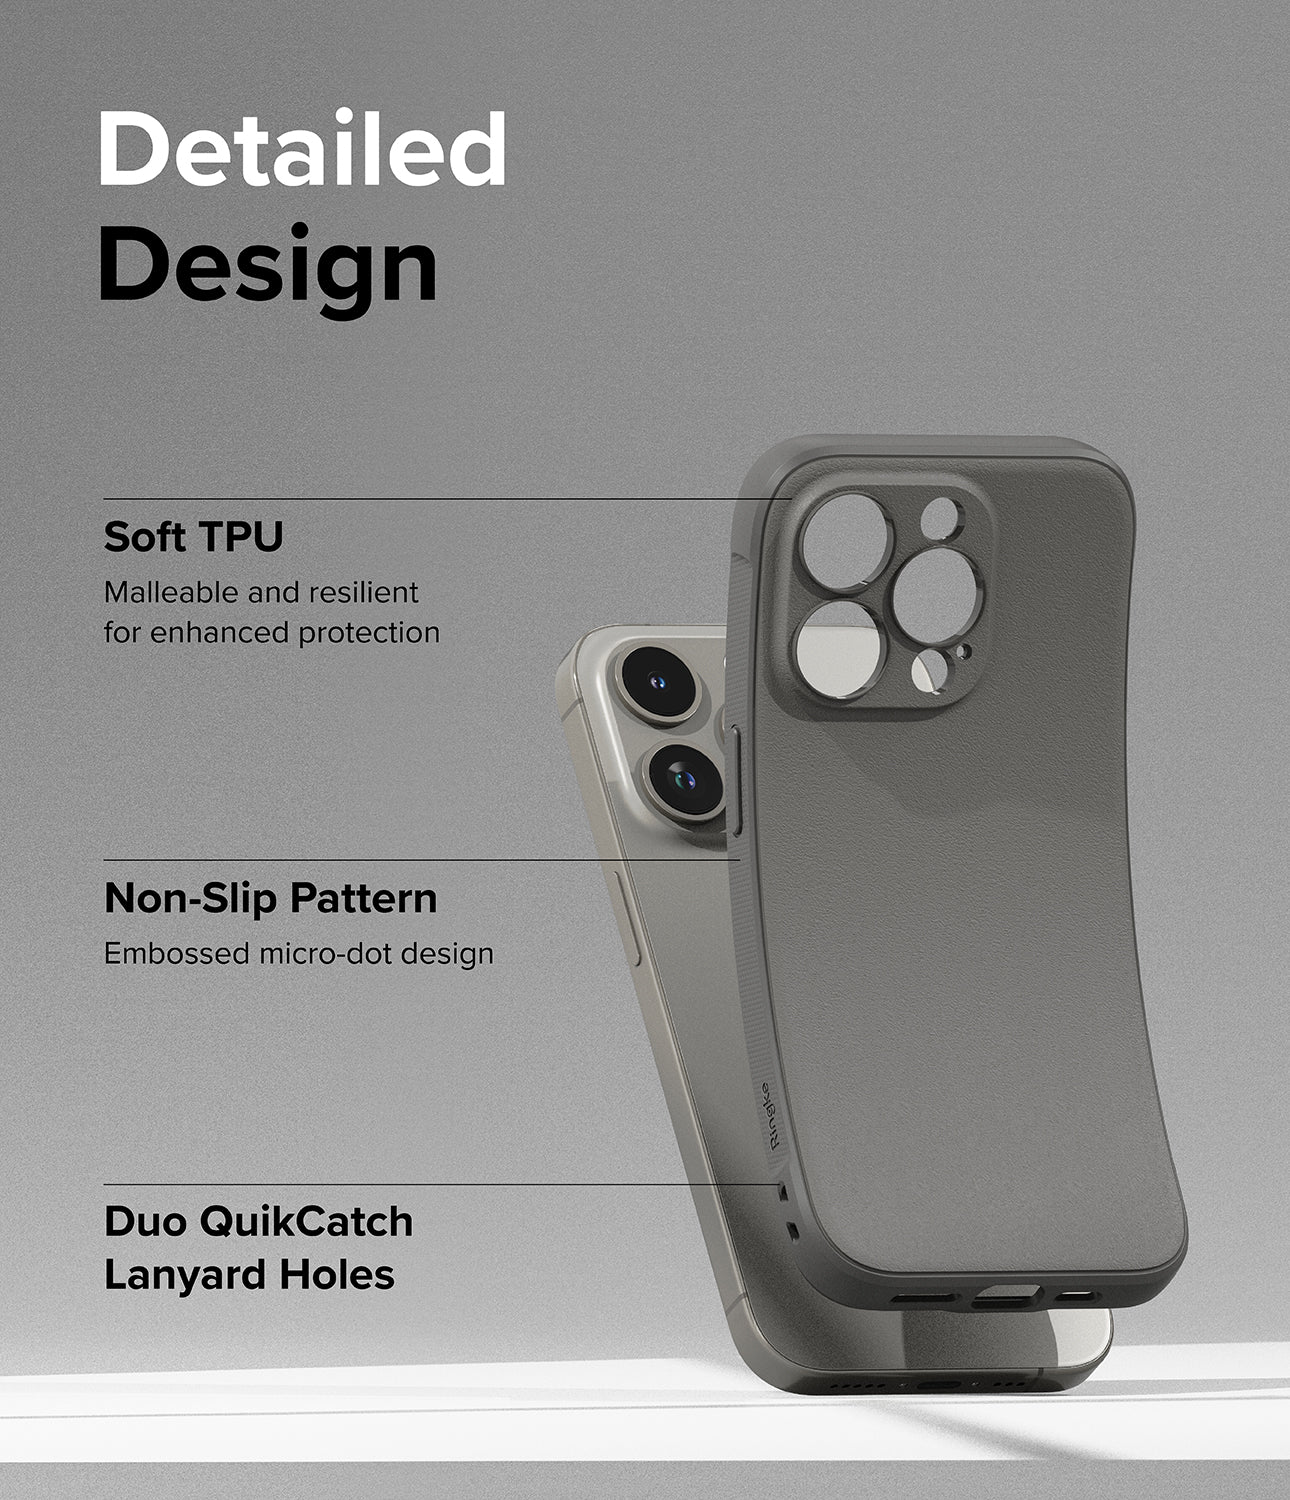 iPhone 15 Pro Max Case | Onyx - Gray - Detailed Design. Malleable and resilient for enhanced protection with Soft TPU. Embossed micro-dot design with Non-Slip Pattern. Duo QuikCatch Lanyard Holes.